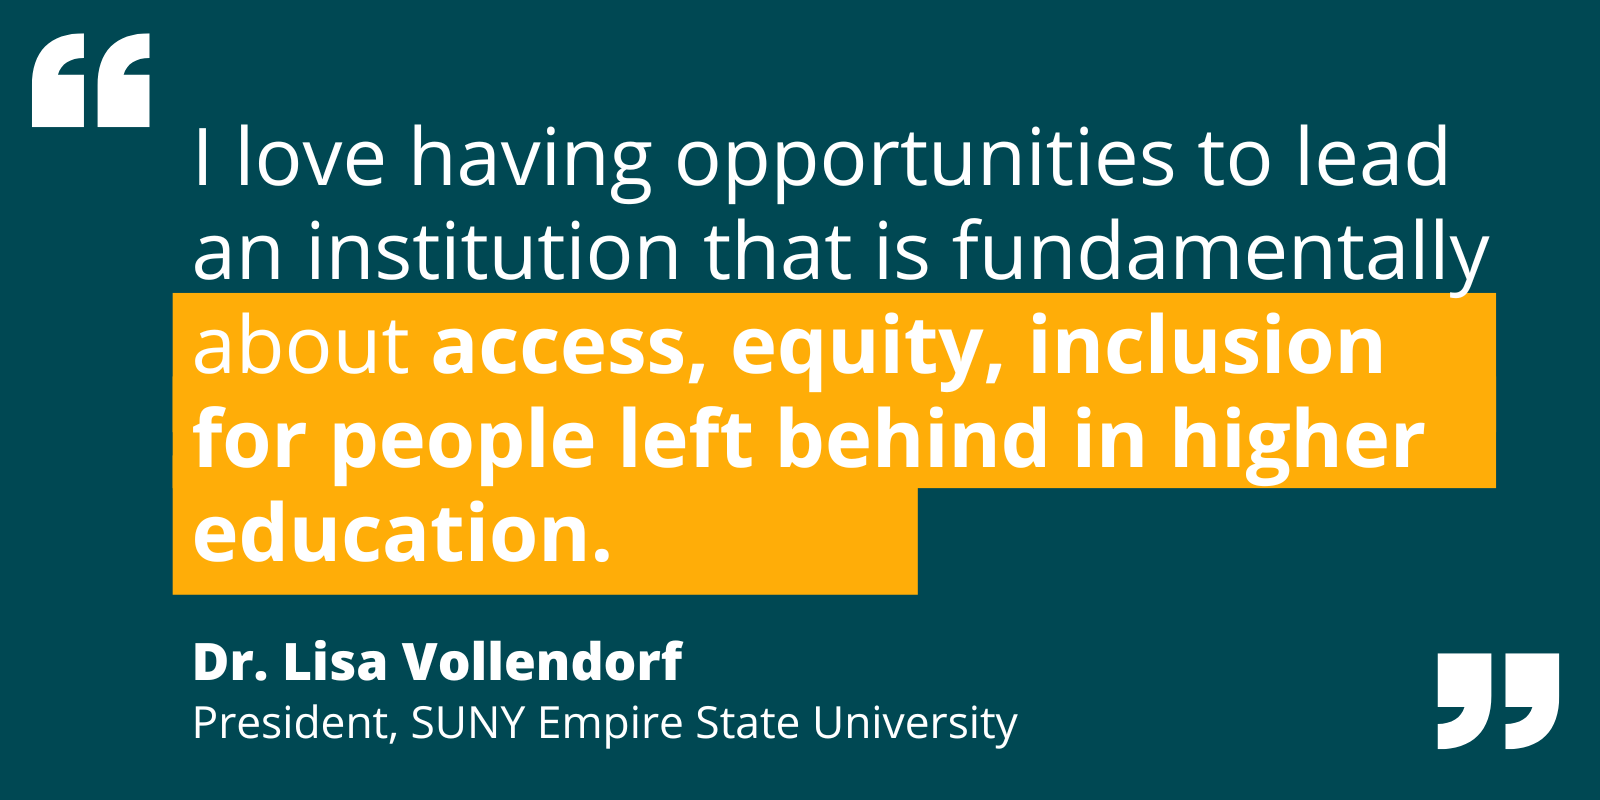 Quote by Lisa Vollendorf re: being grateful to lead an institution focused on access, equity, and inclusion.